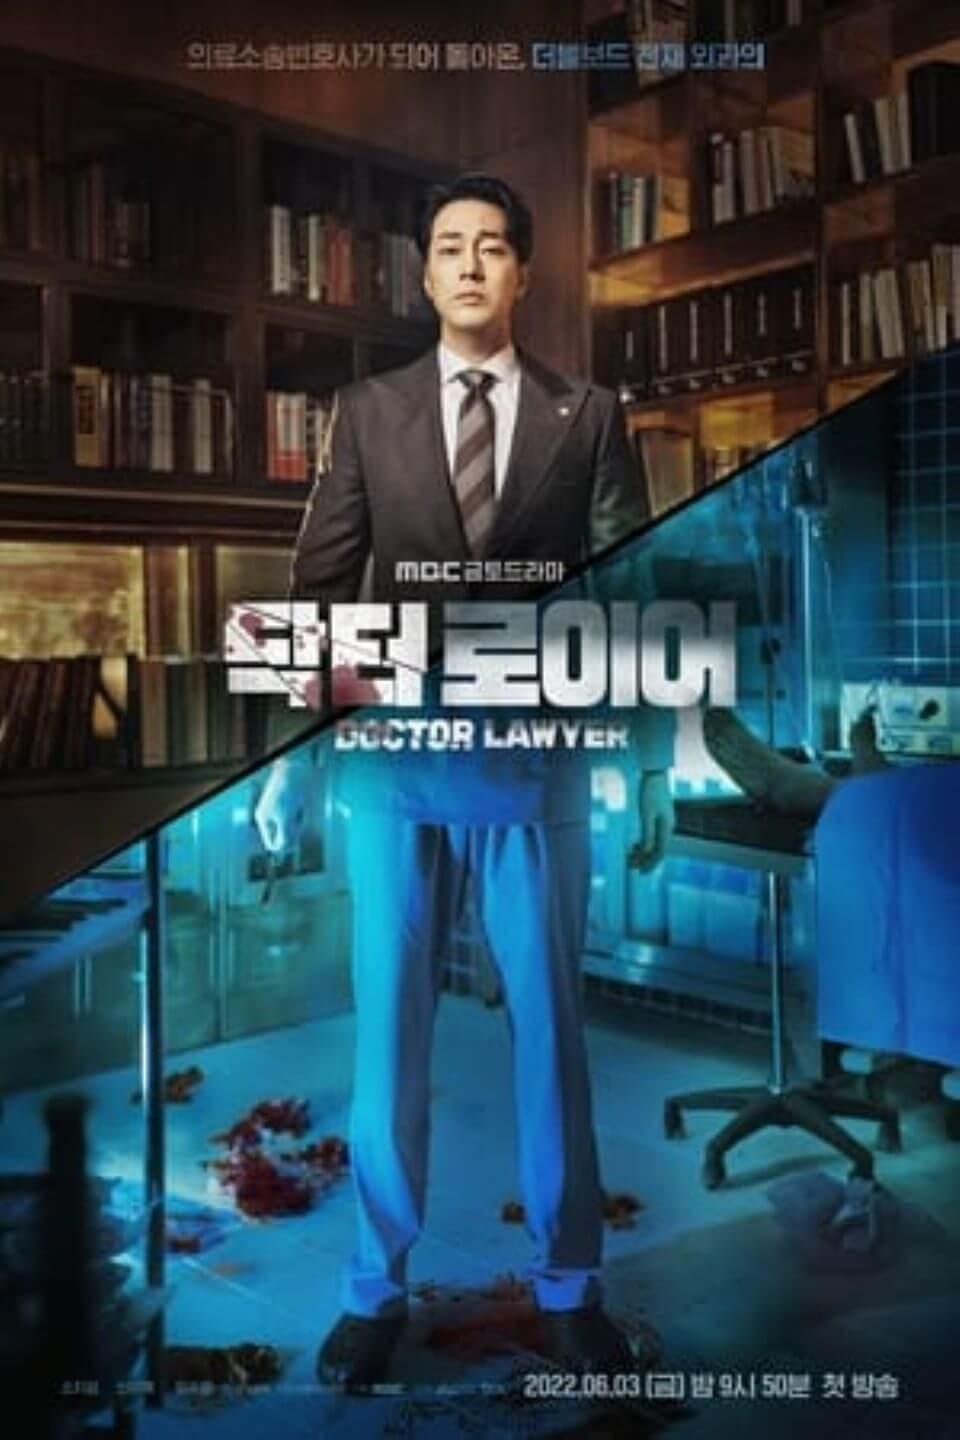 TV ratings for Doctor Lawyer (닥터 로이어) in Sweden. MBC TV series